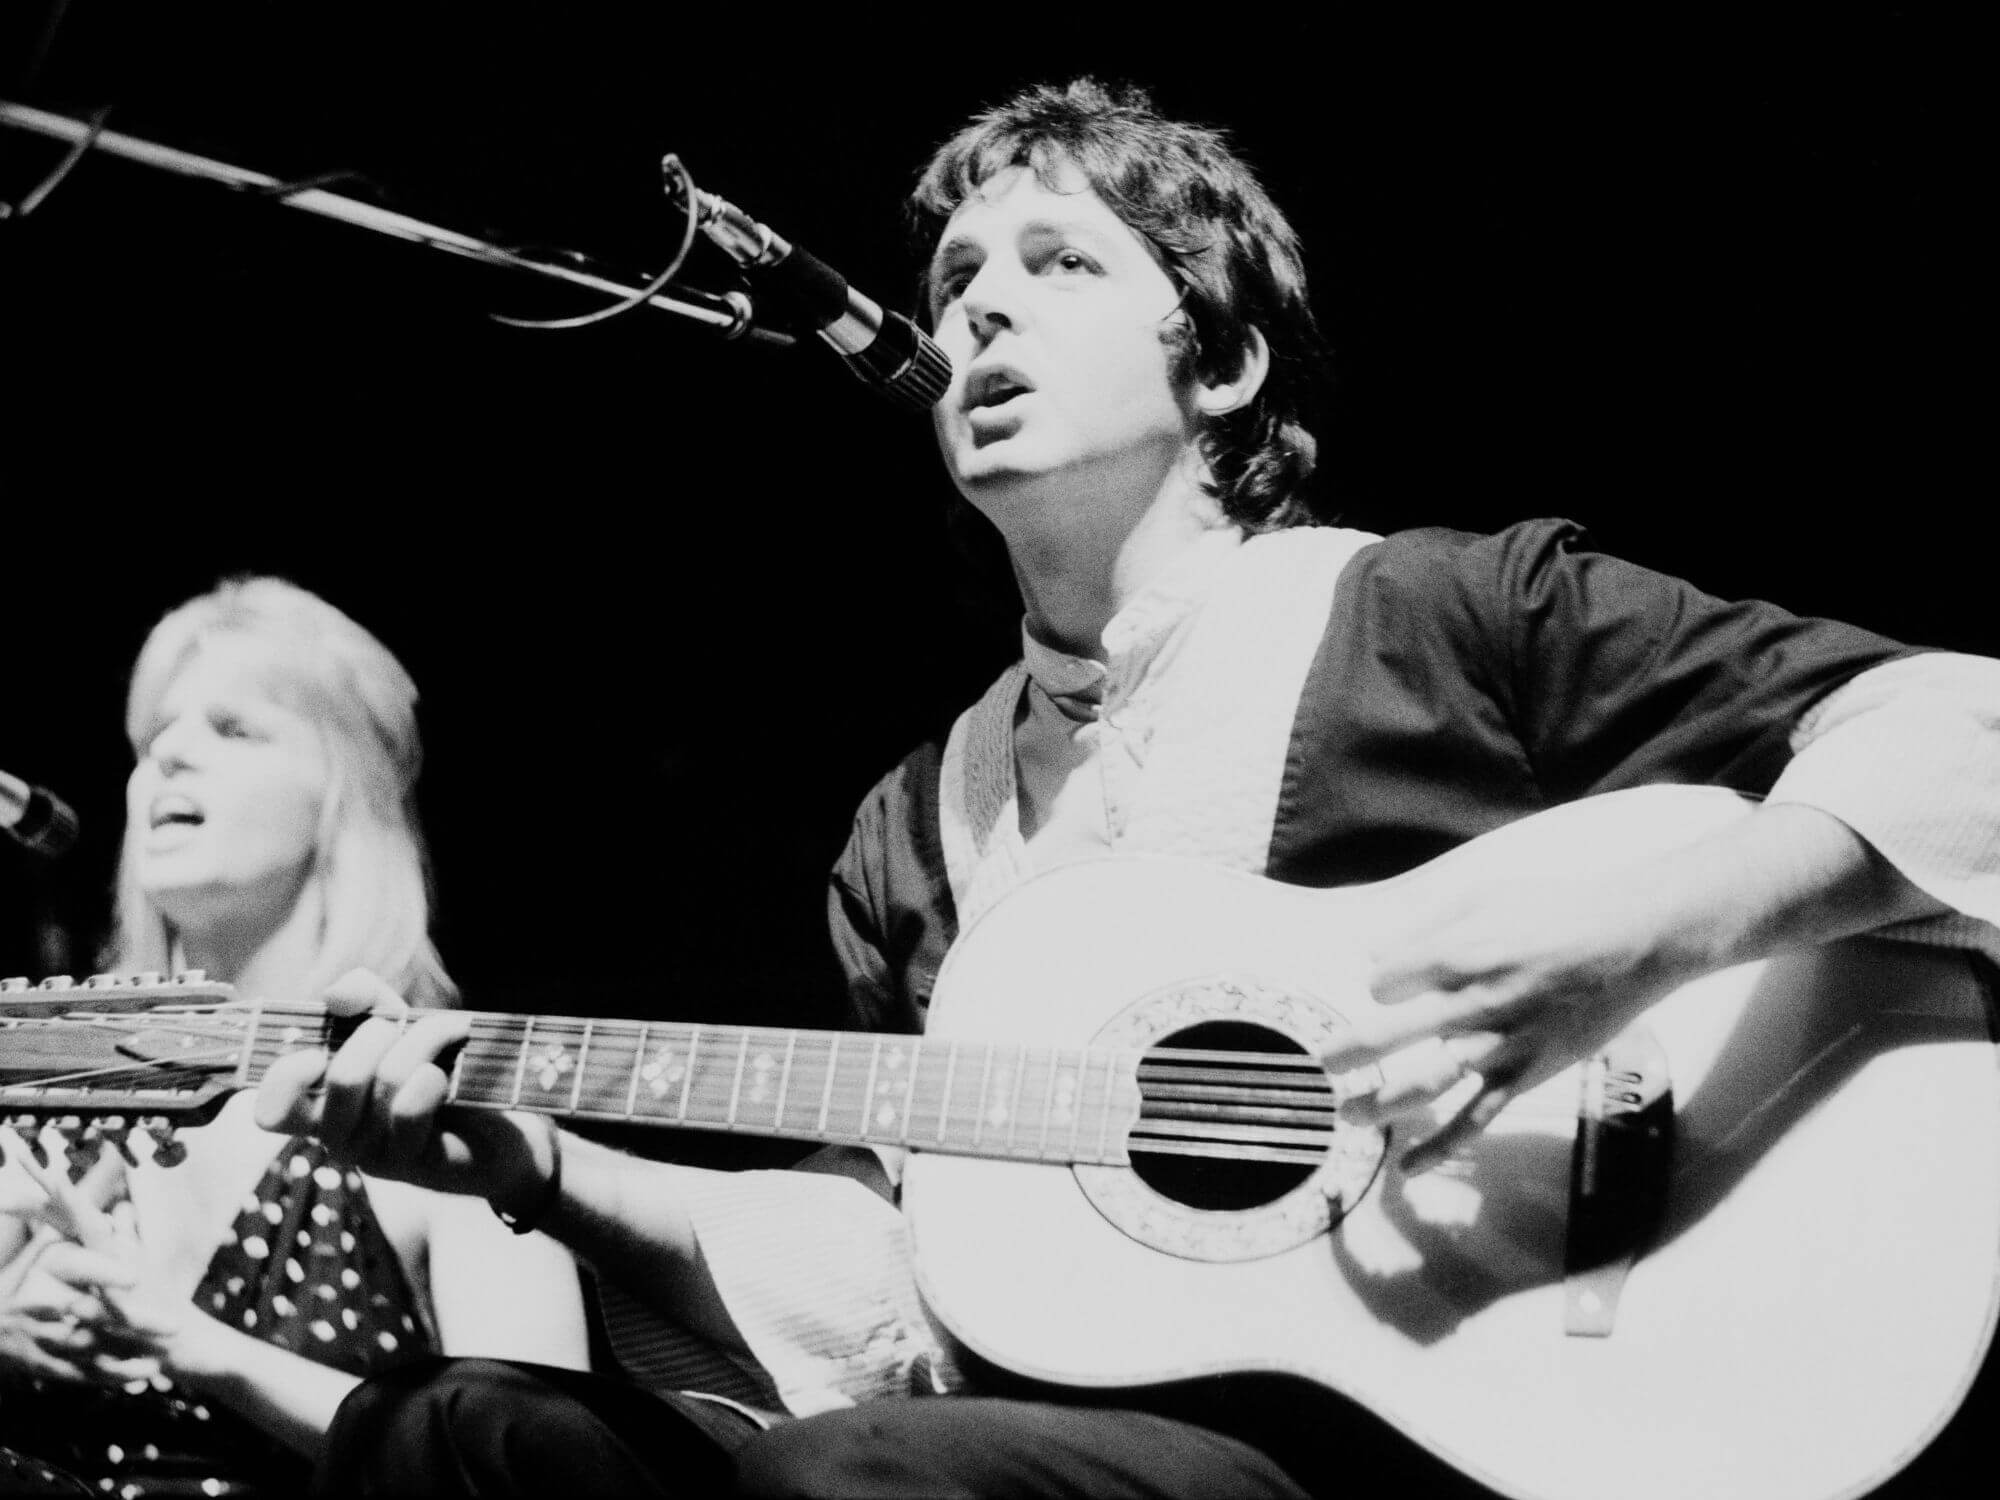 Paul and Linda McCartney performing together as part of Wings